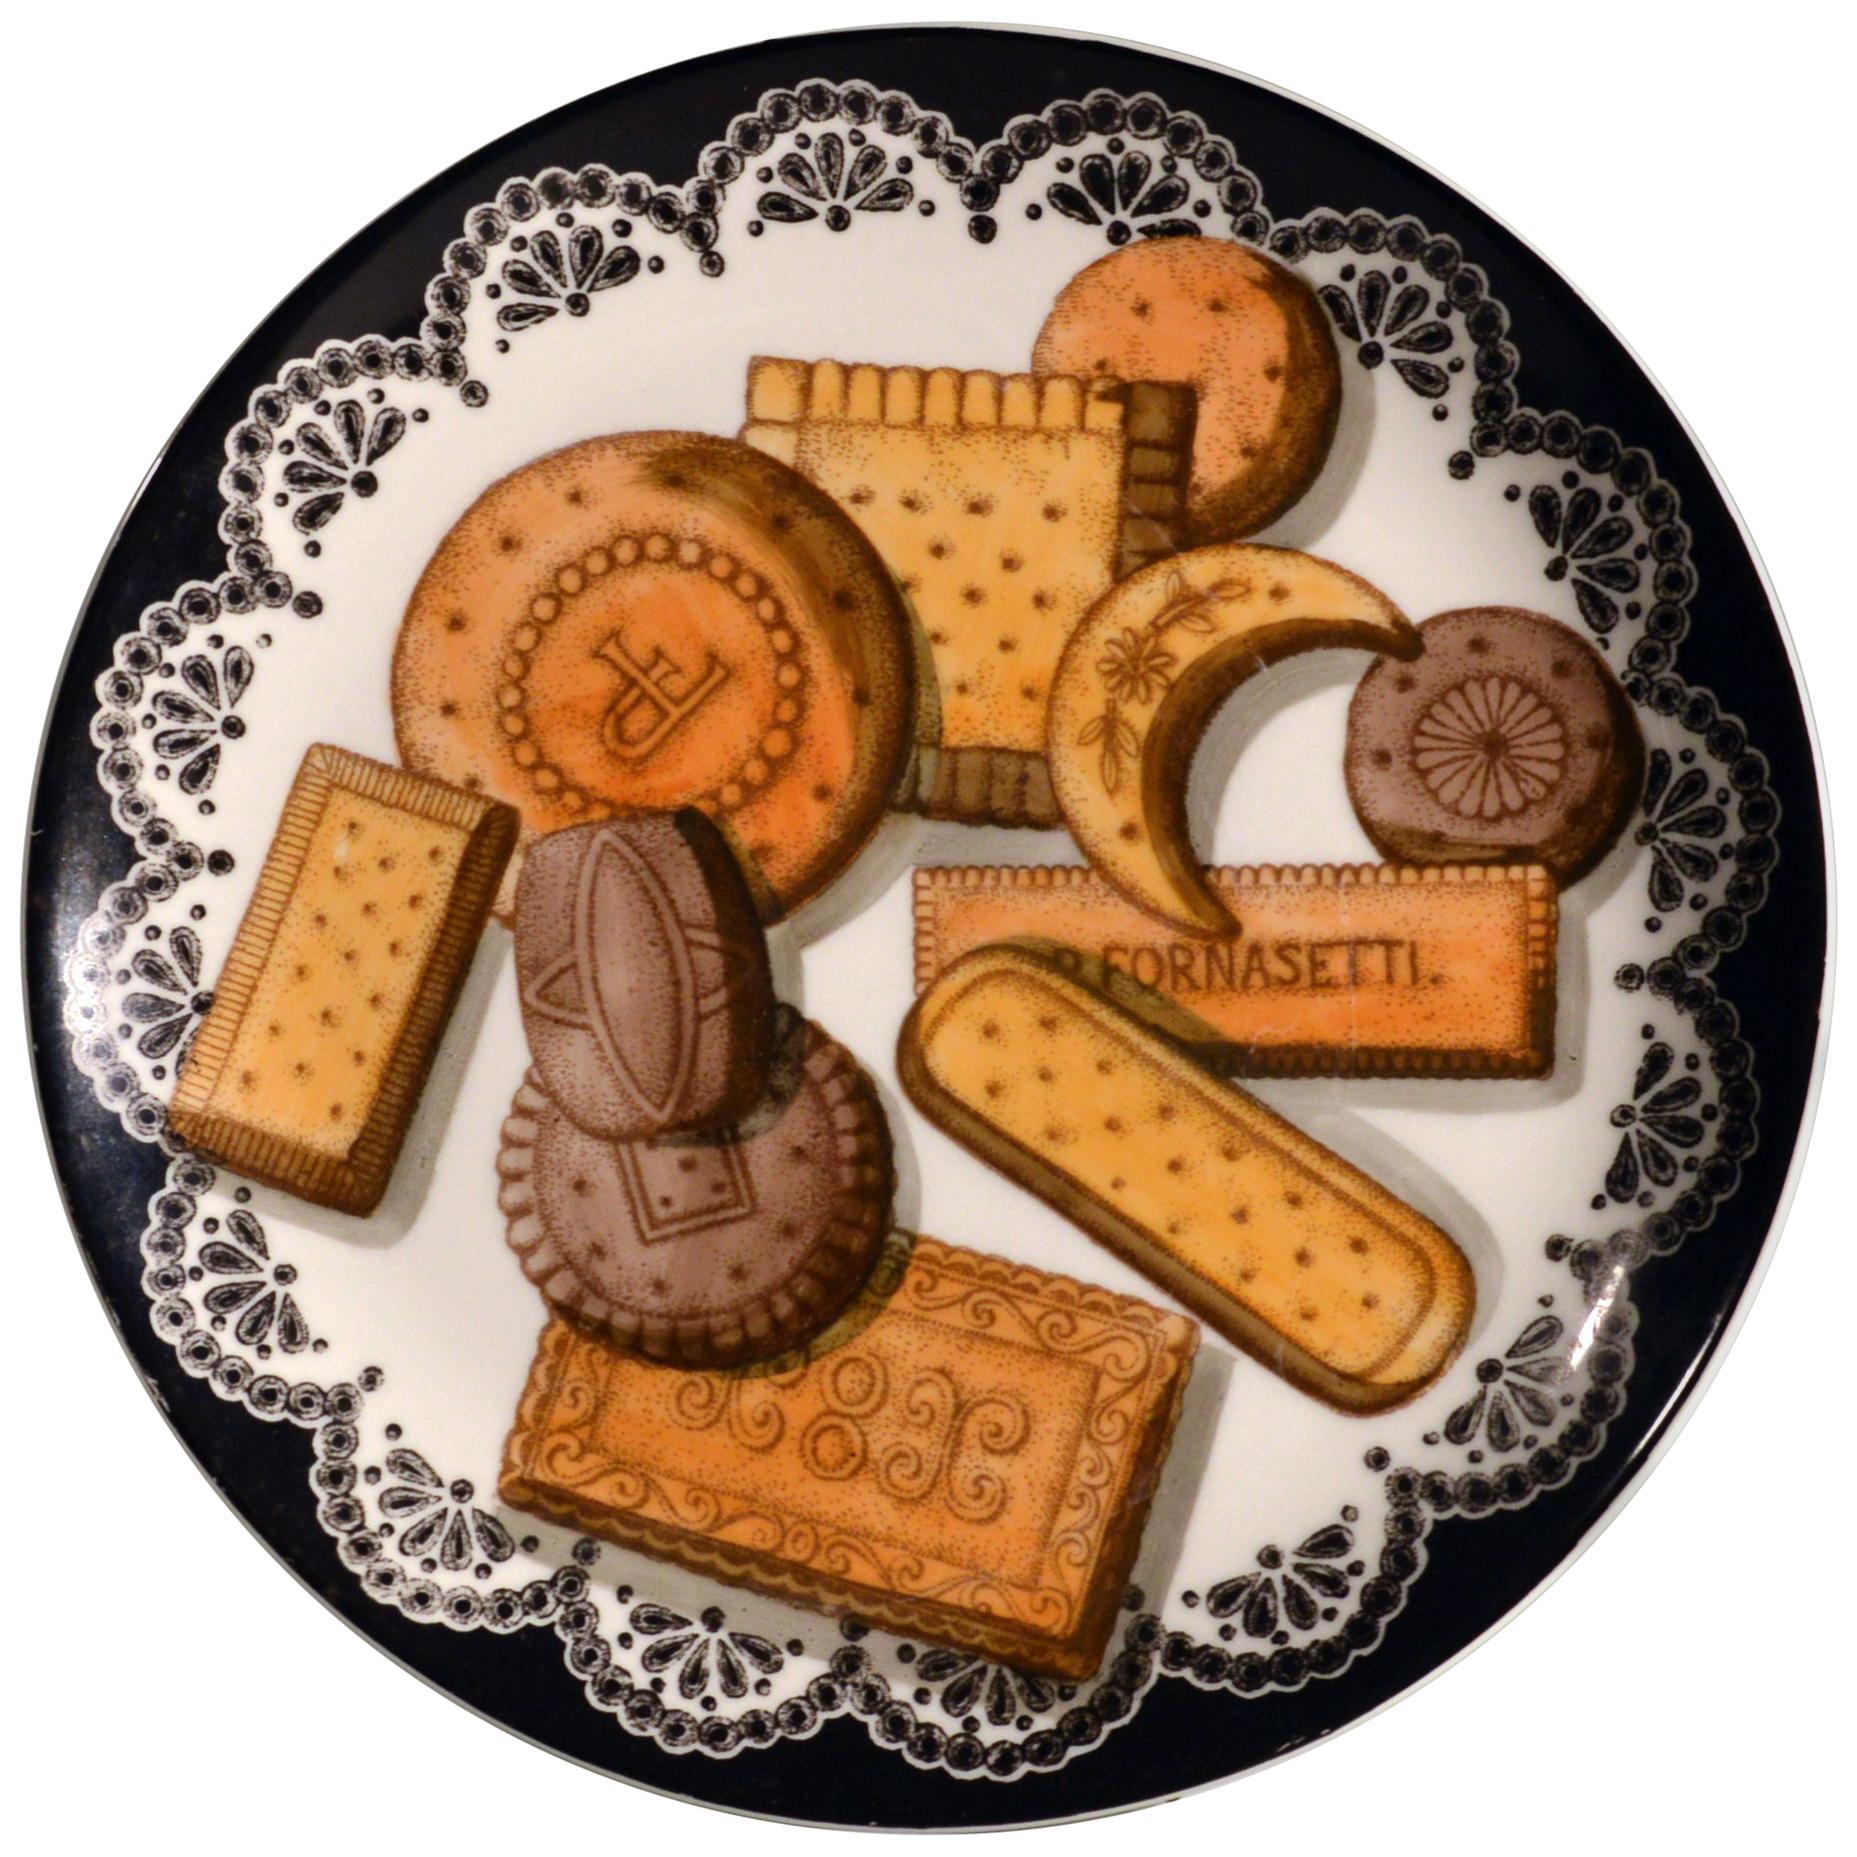 Piero Fornasetti Biscotti Pattern Porcelain Plate, with Trompe L'oeil Cookies